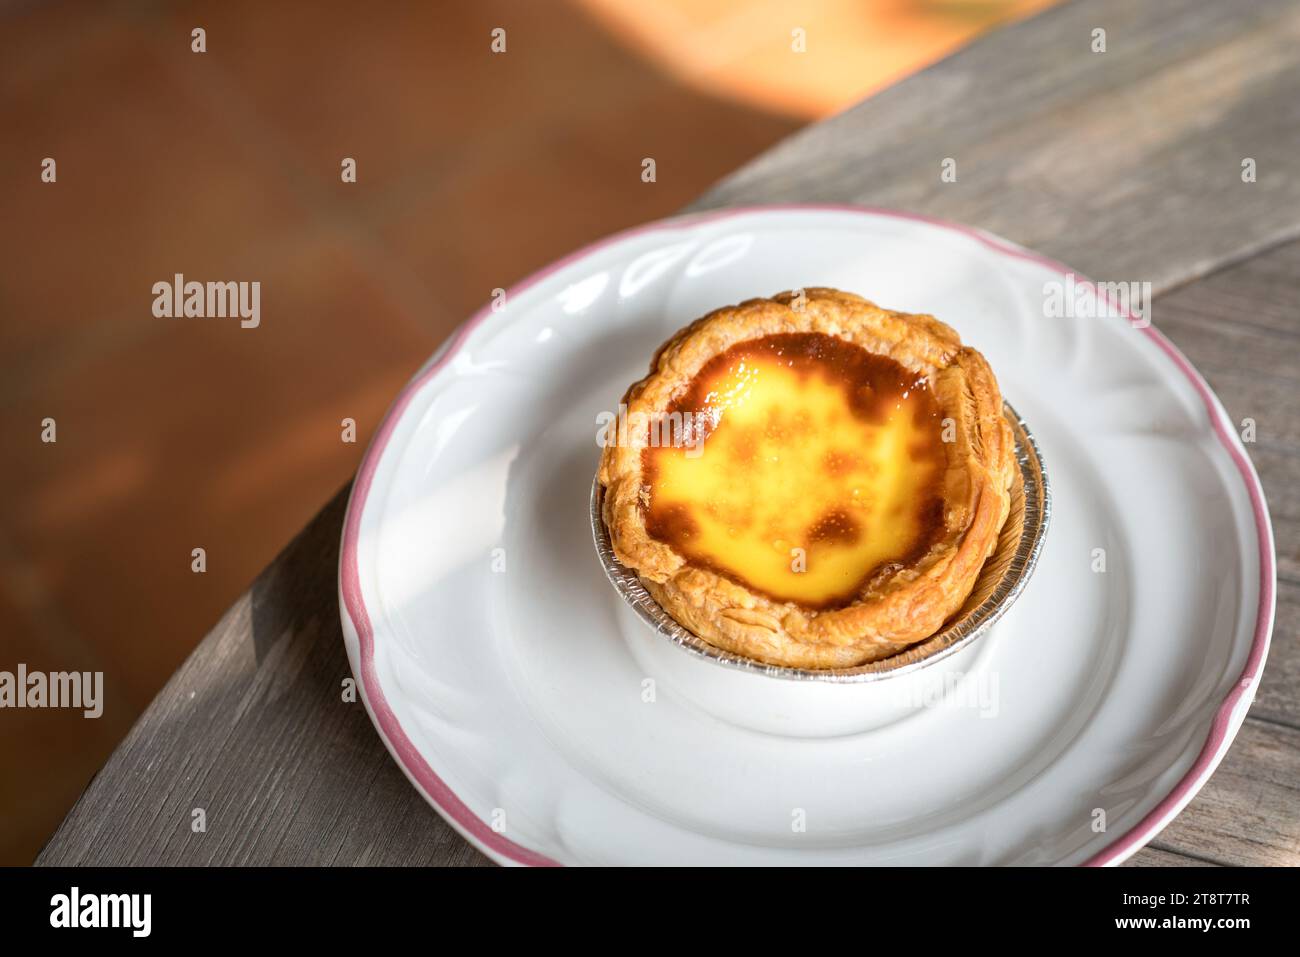 Portuguese egg tart on a white plate. Delicious pastry. Stock Photo